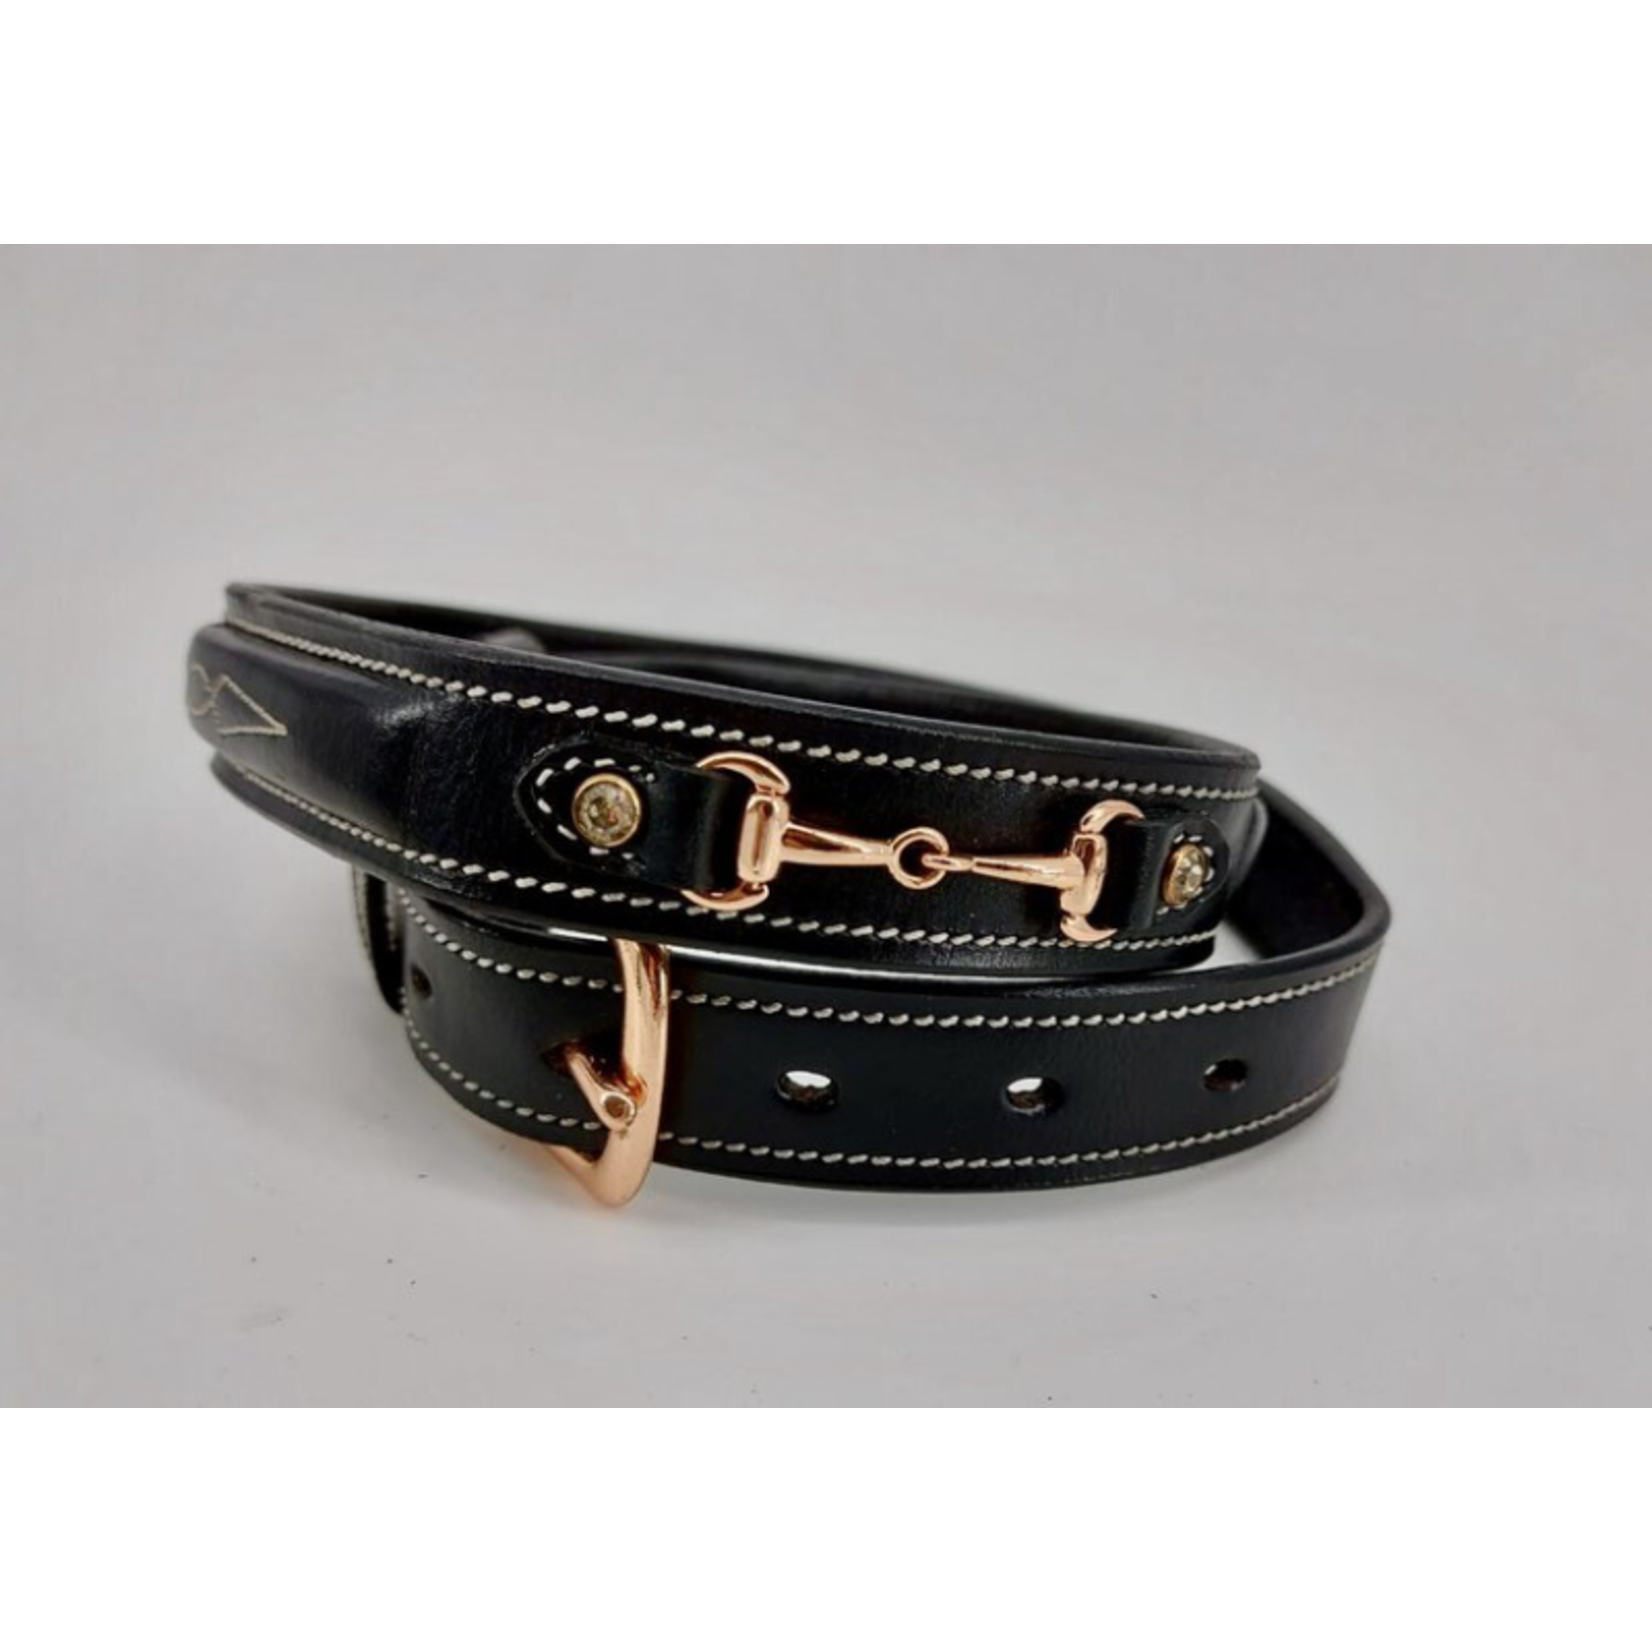 Horses and Lifestyle Equestrian style belts 4 Colors